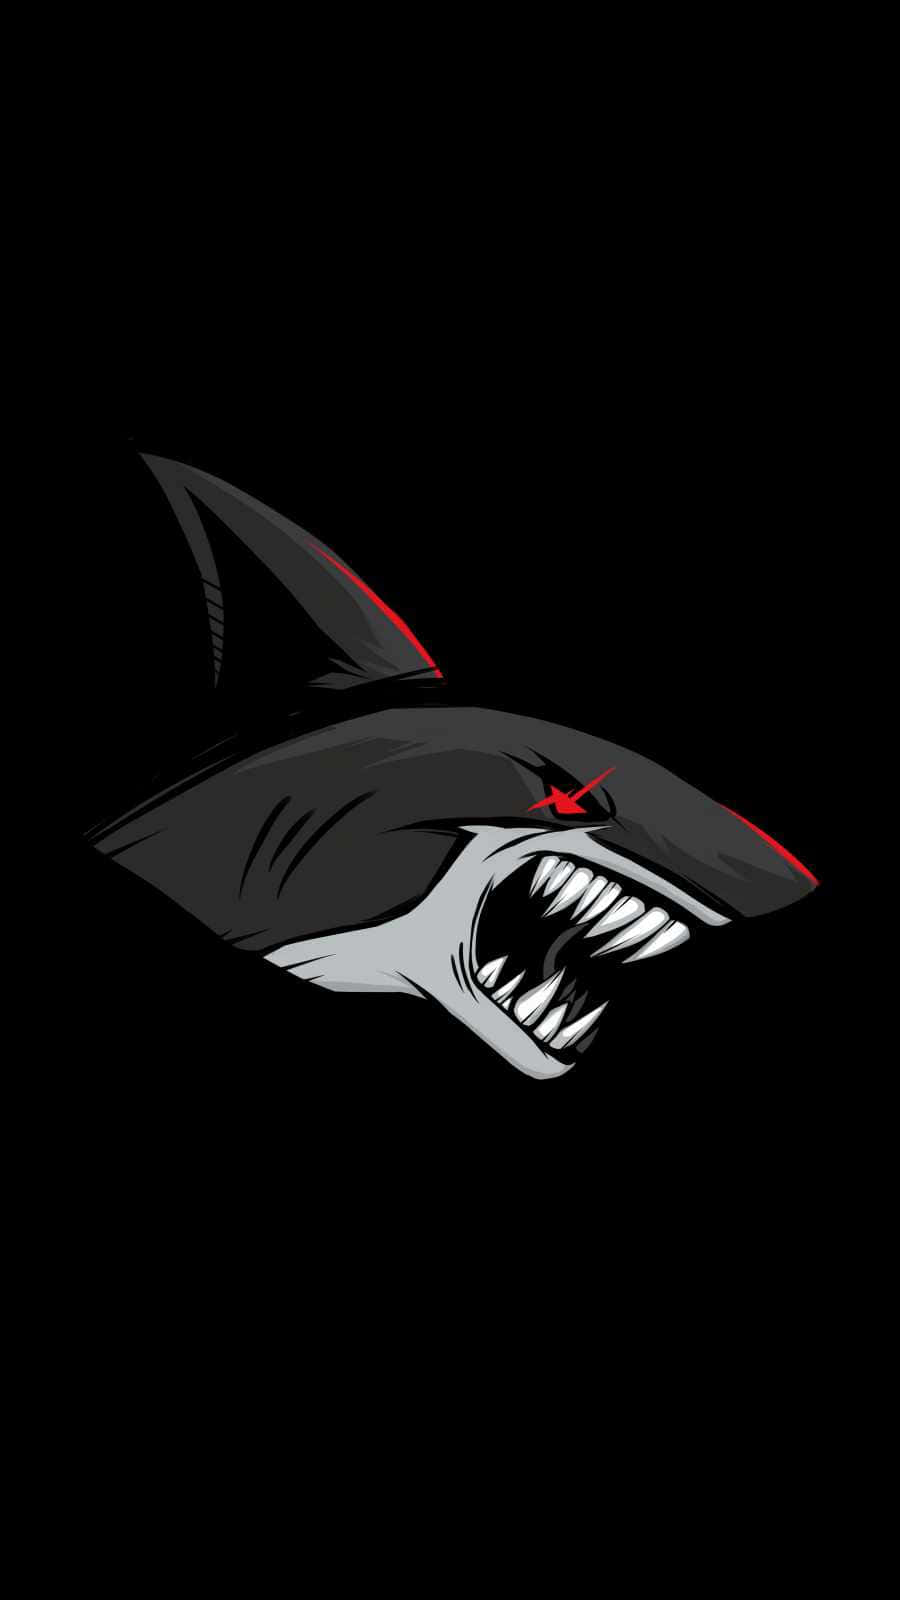 Dive into Adventure with this Shark Iphone! Wallpaper